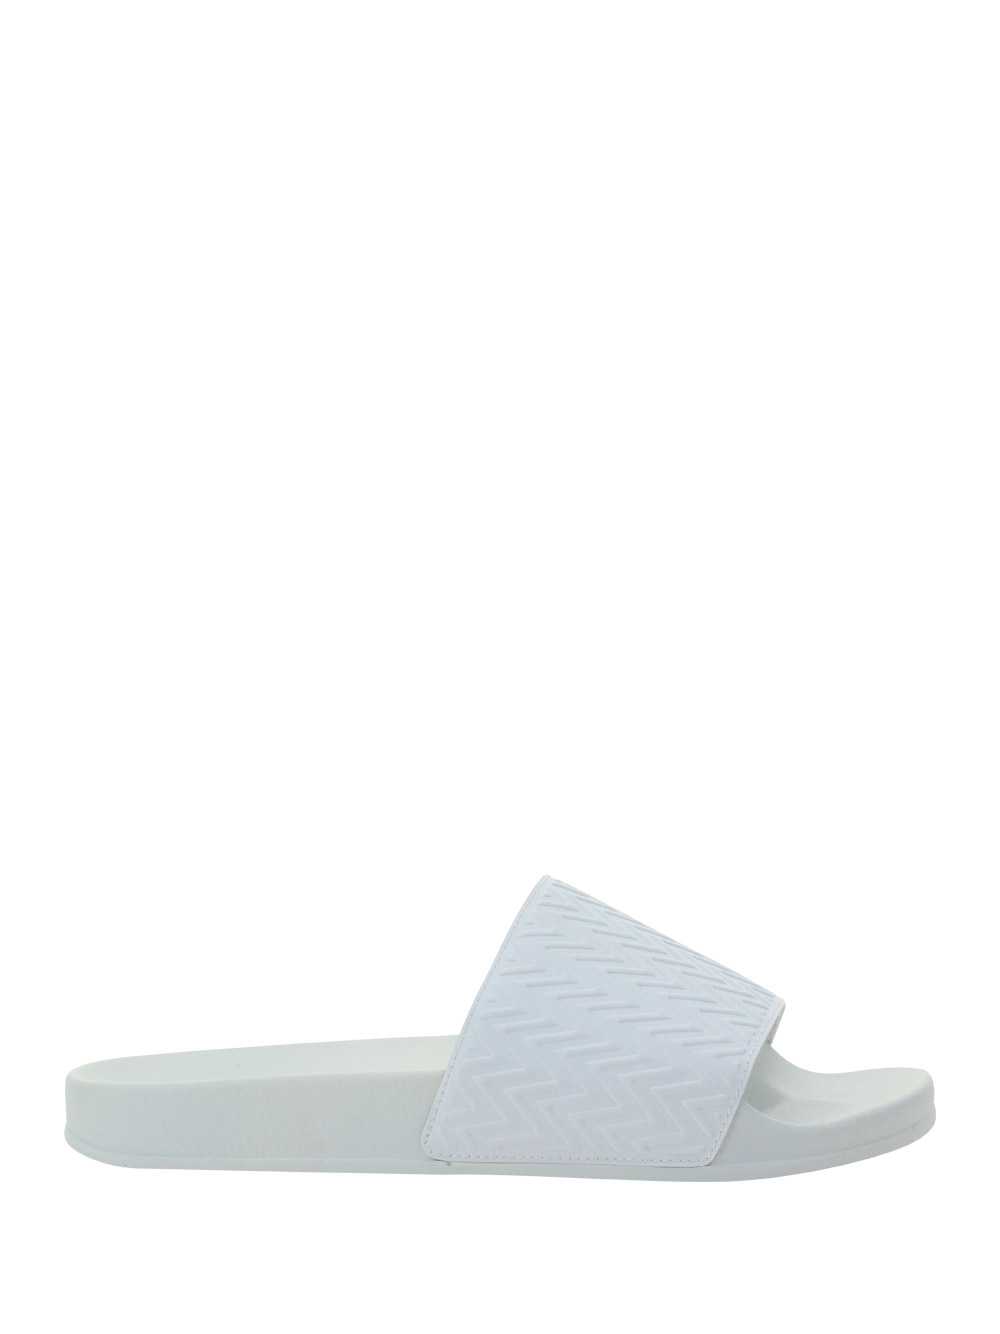 Acbc Sandals In White